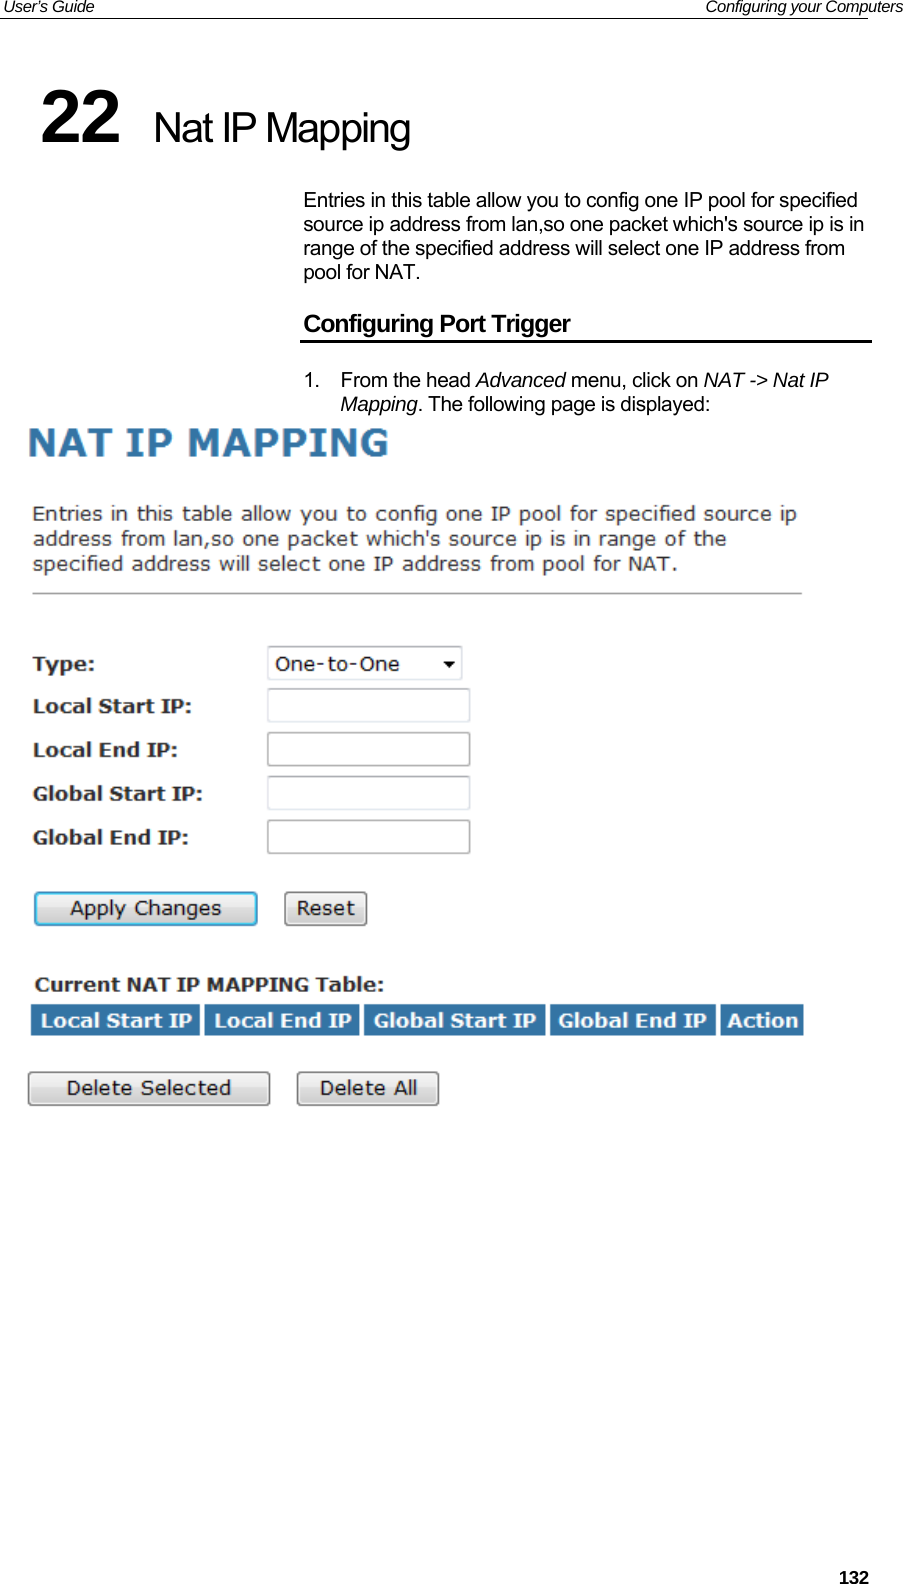 User’s Guide   Configuring your Computers 22  Nat IP Mapping Entries in this table allow you to config one IP pool for specified source ip address from lan,so one packet which&apos;s source ip is in range of the specified address will select one IP address from pool for NAT. Configuring Port Trigger 1. From the head Advanced menu, click on NAT -&gt; Nat IP Mapping. The following page is displayed:              132